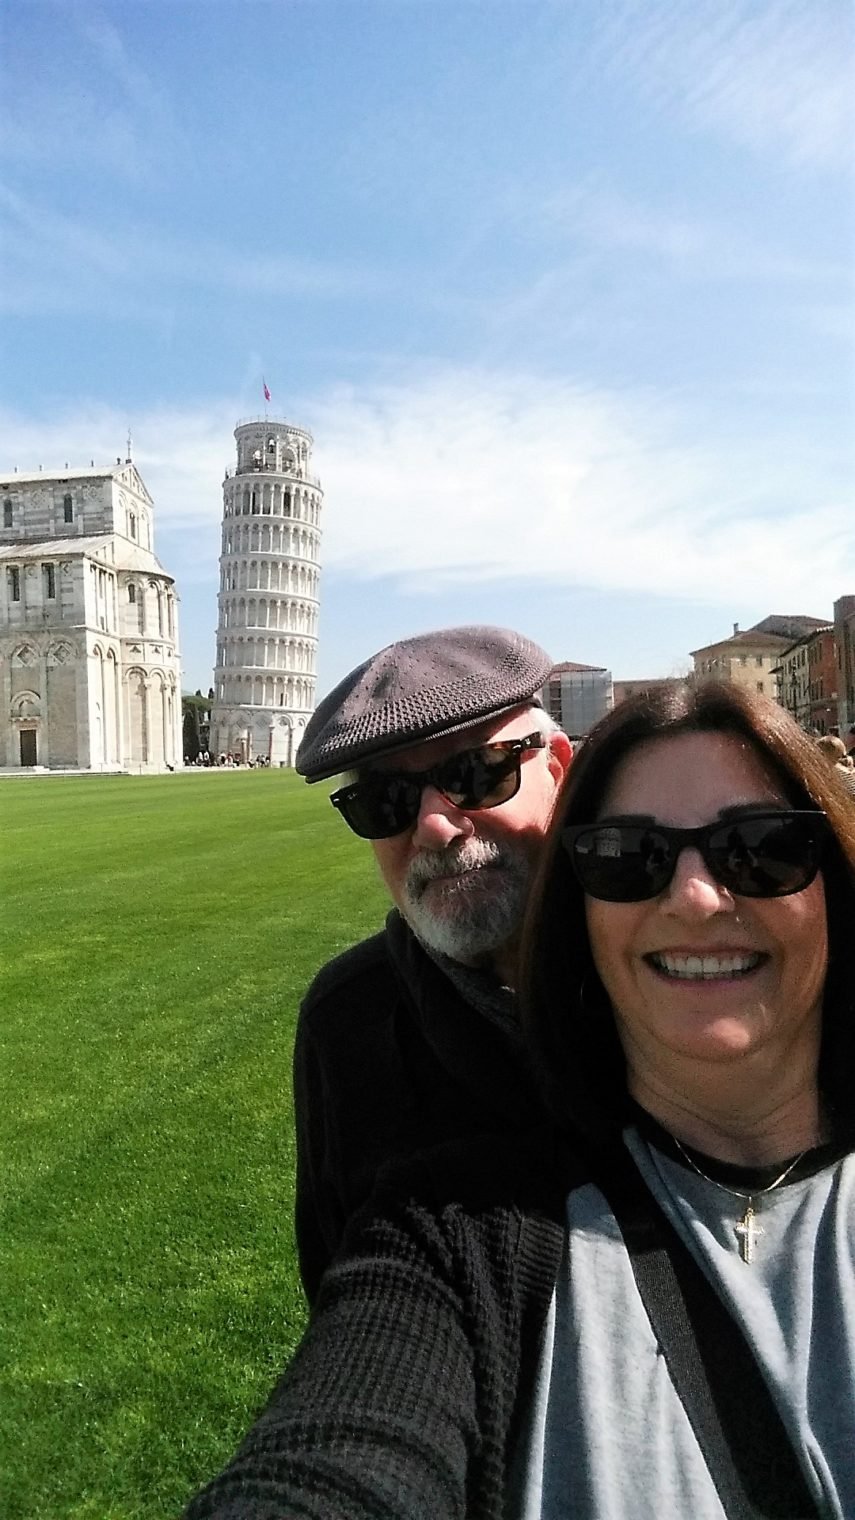 us in the Field of Miracles, Pisa